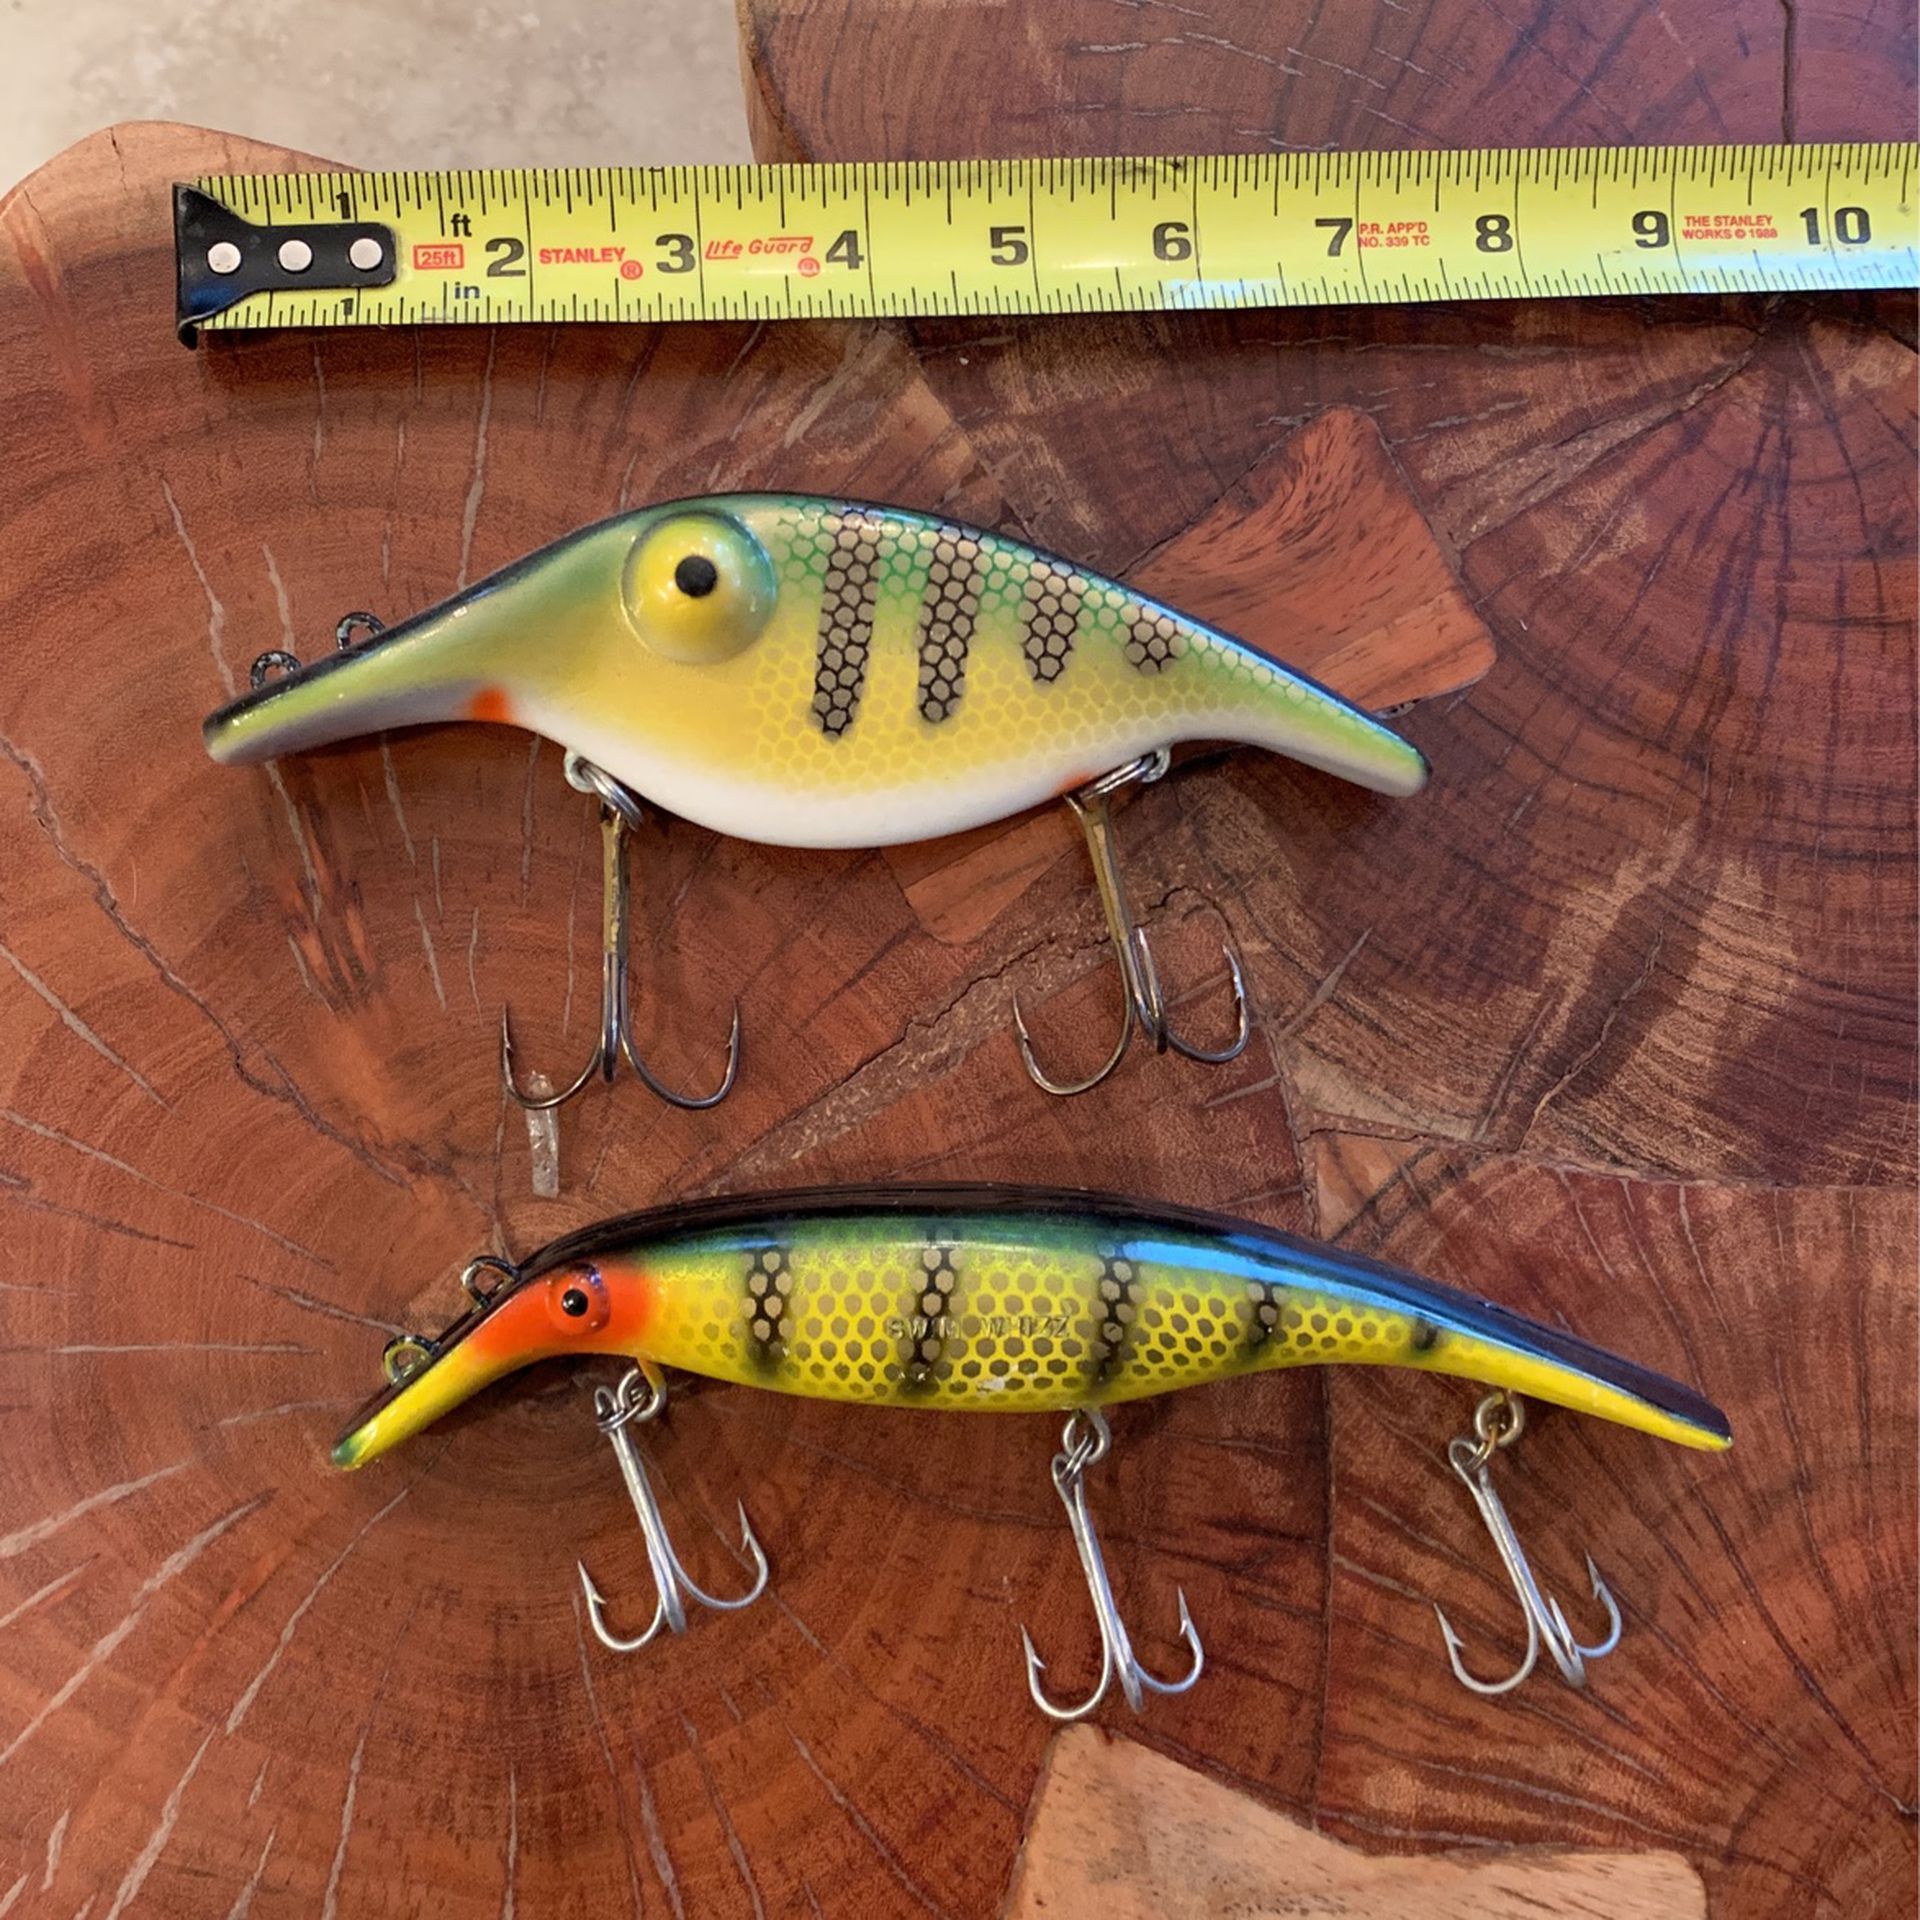 Musky Pike Bass Fishing Lures And Tackle For Trolling 